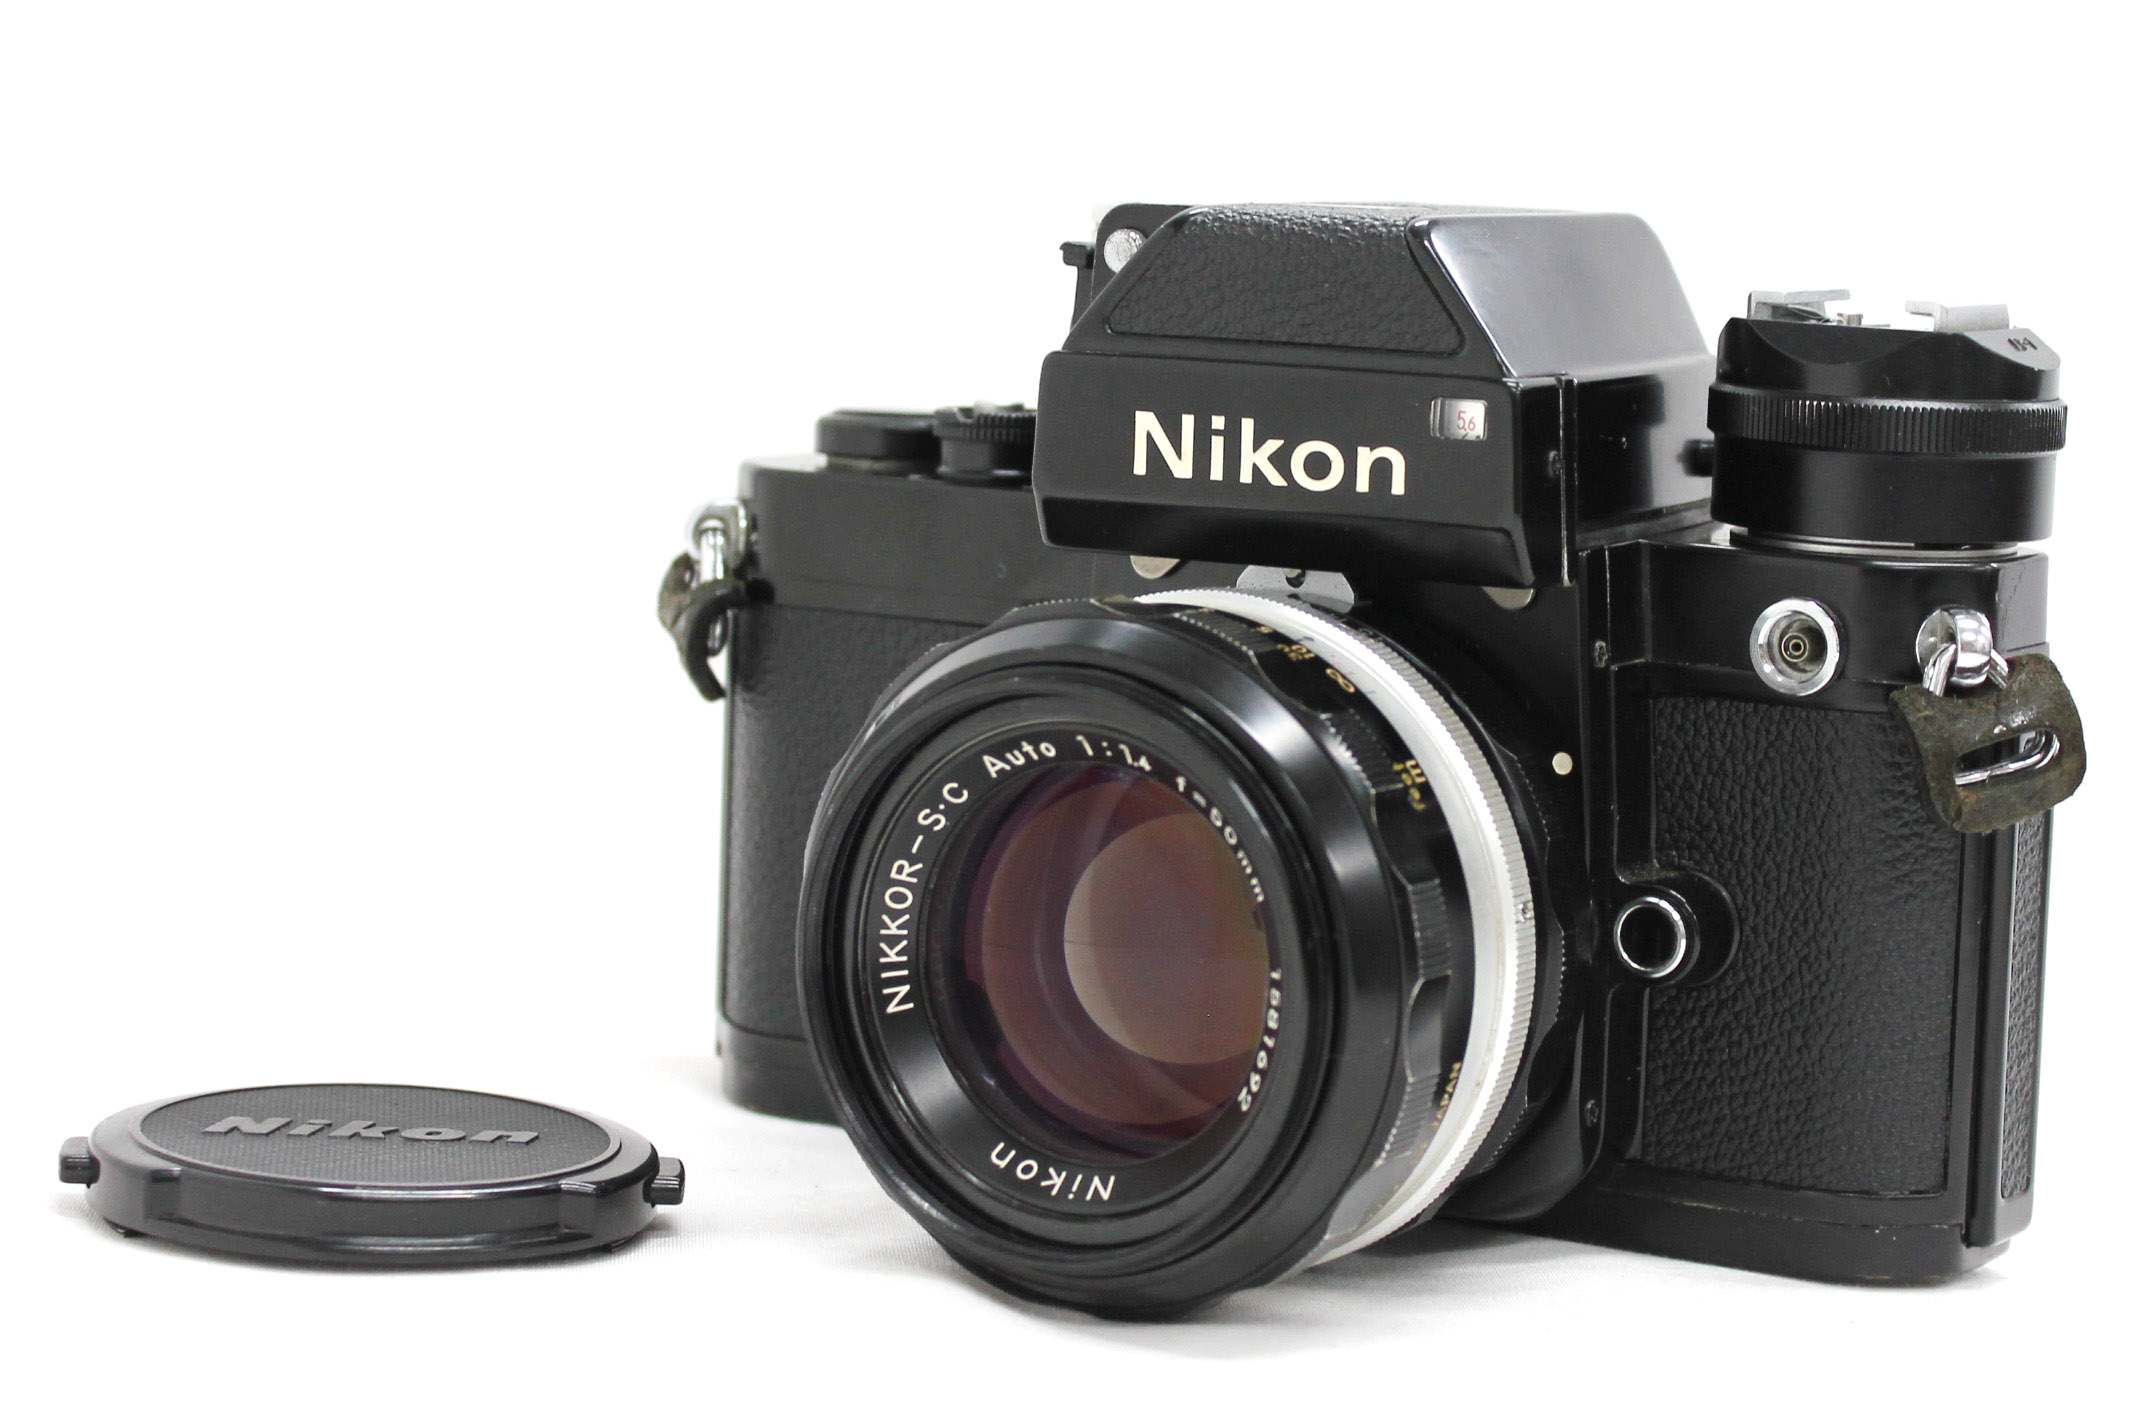 Japan Used Camera Shop | Nikon F2 Photomic DP-1 Black with Nikkor S.C 50mm F/1.4 Lens and AS-1 Flash Light Coupler from Japan